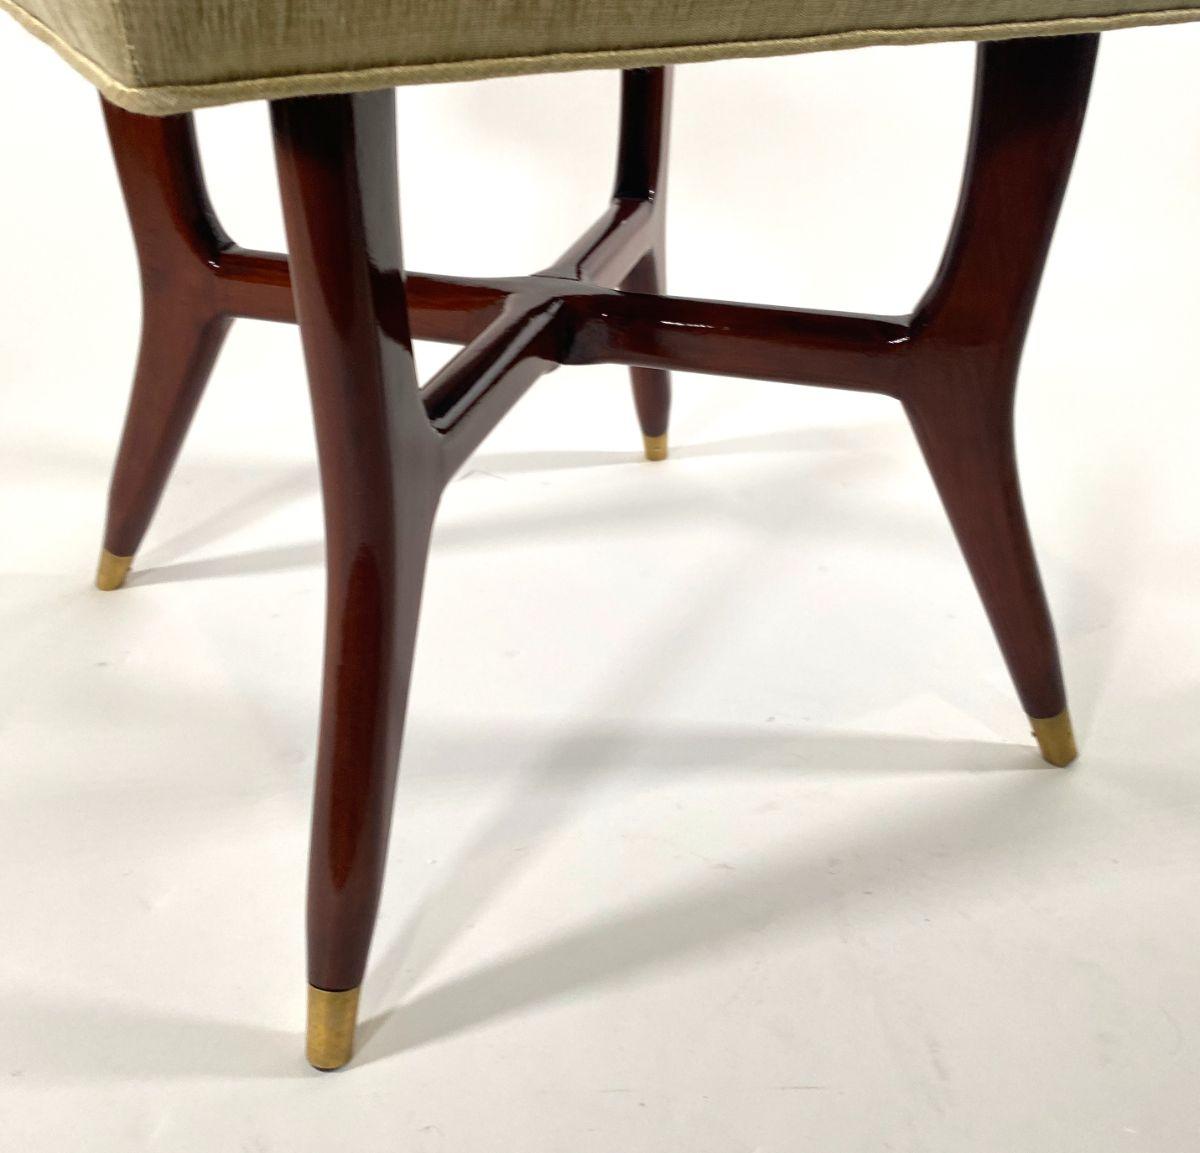 Pair Italian Modern Mahogany and Brass Ottomans/Benches/Taboret, Attr. Gio Ponti 1